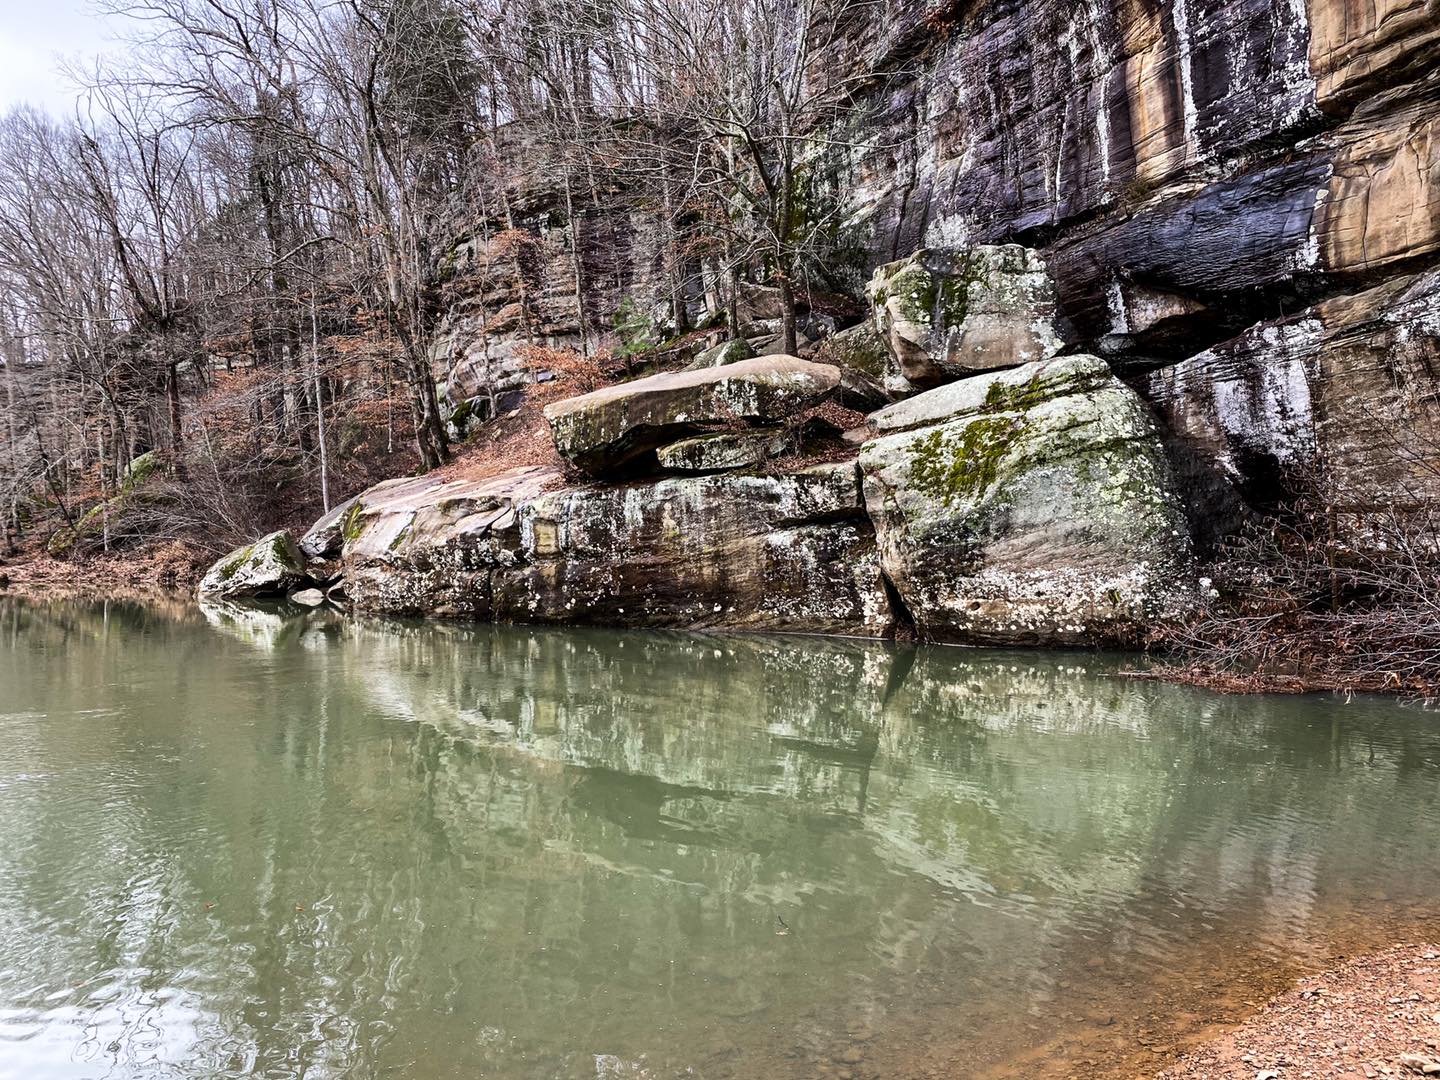 Southern Illinois Hiking Trails: Bell Smith Springs